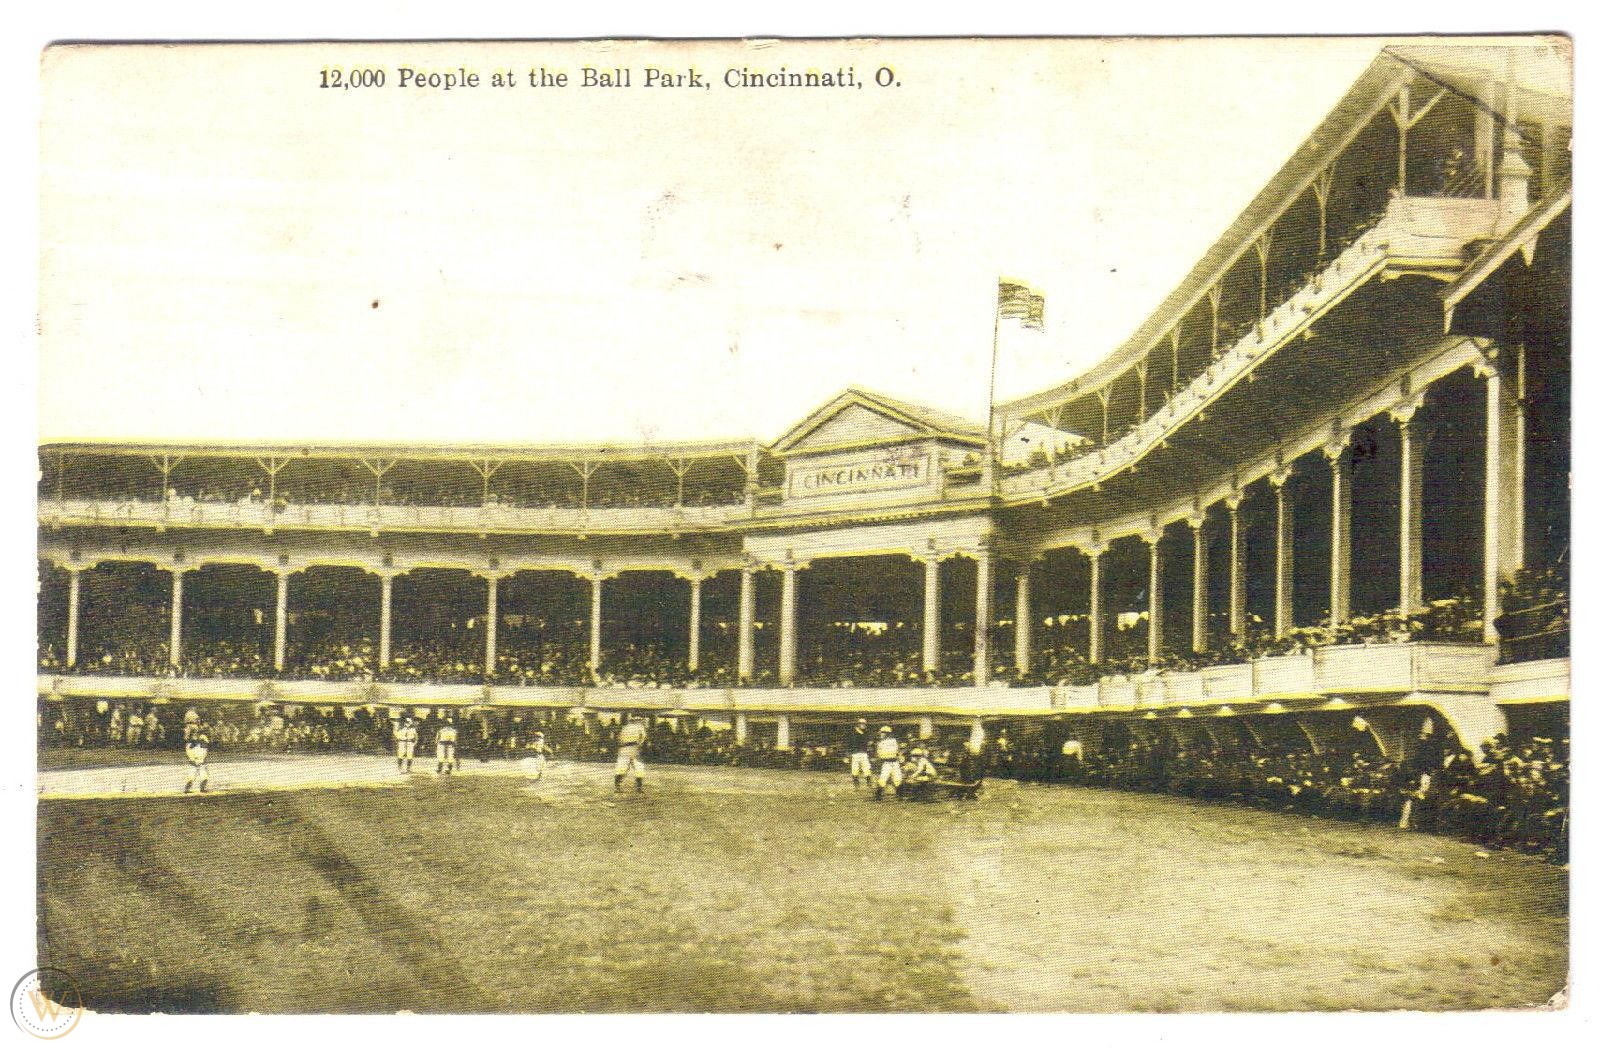 Palace of the Fans, former home of the Cincinnati Reds